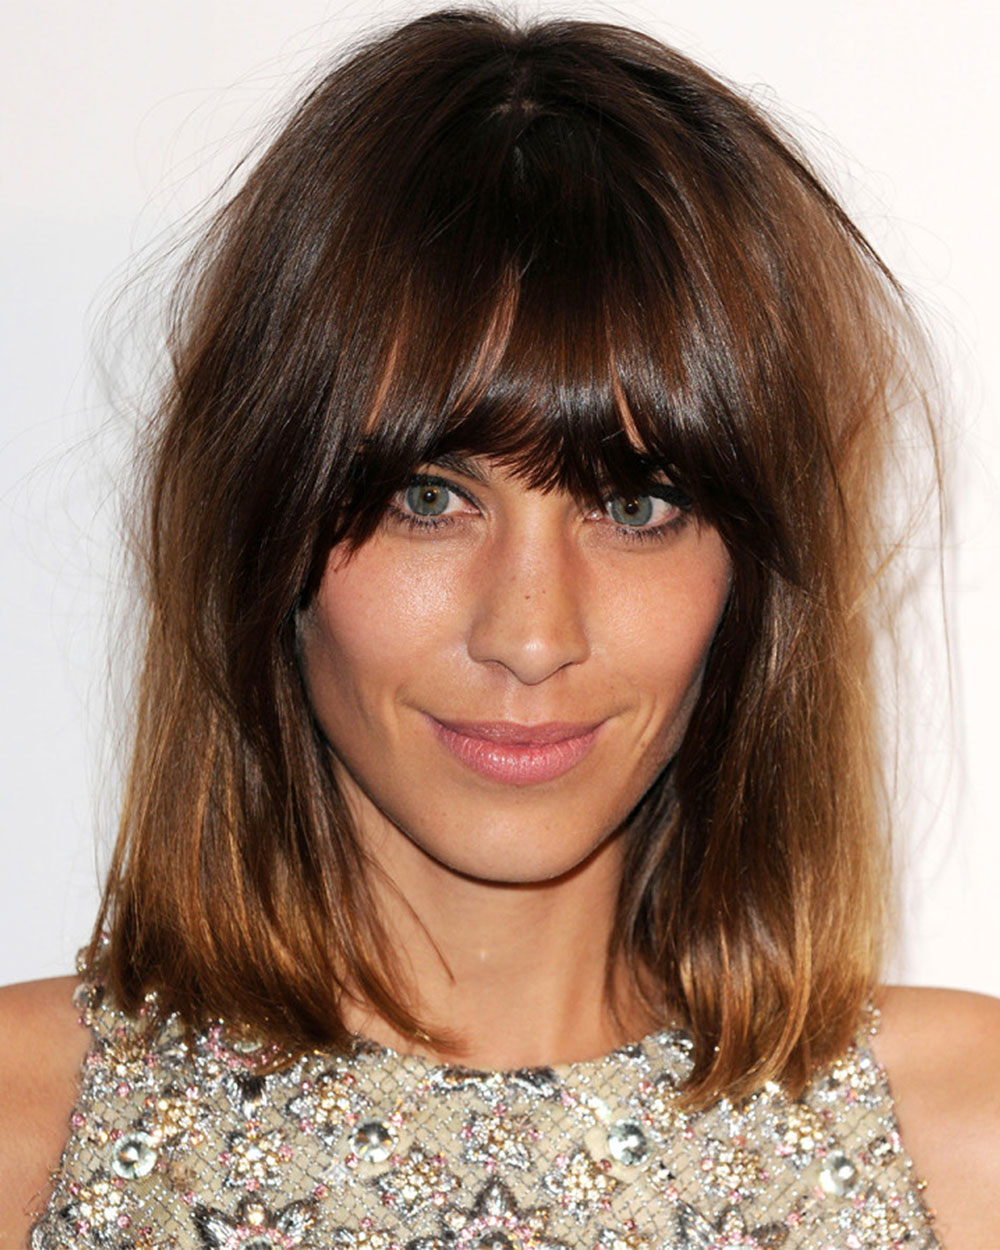 These celeb hairstyles will make you want a fringe – Fashion Quarterly